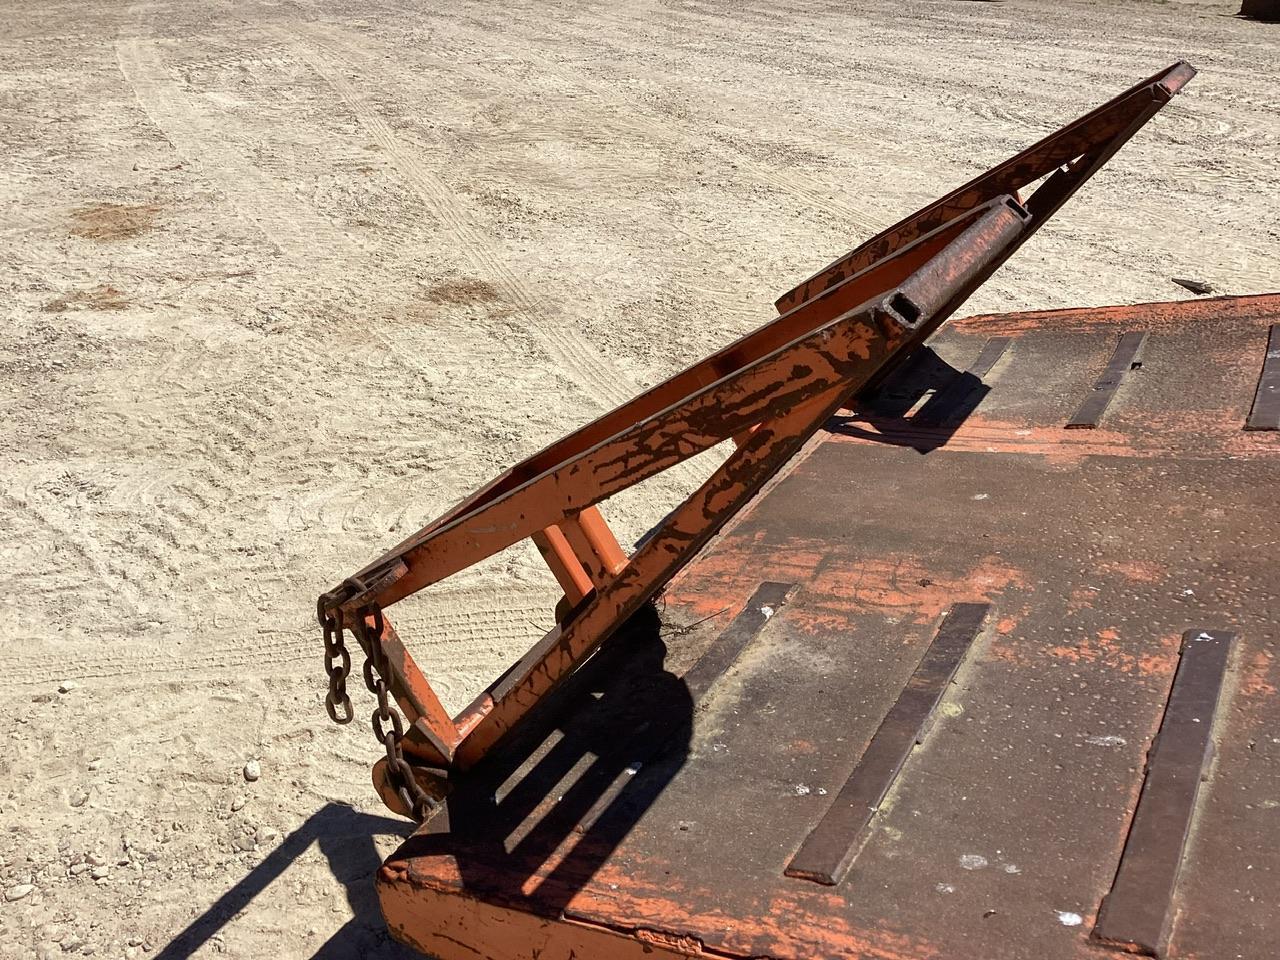 Double Axle Pintle Hitch Pull Behind Trailer